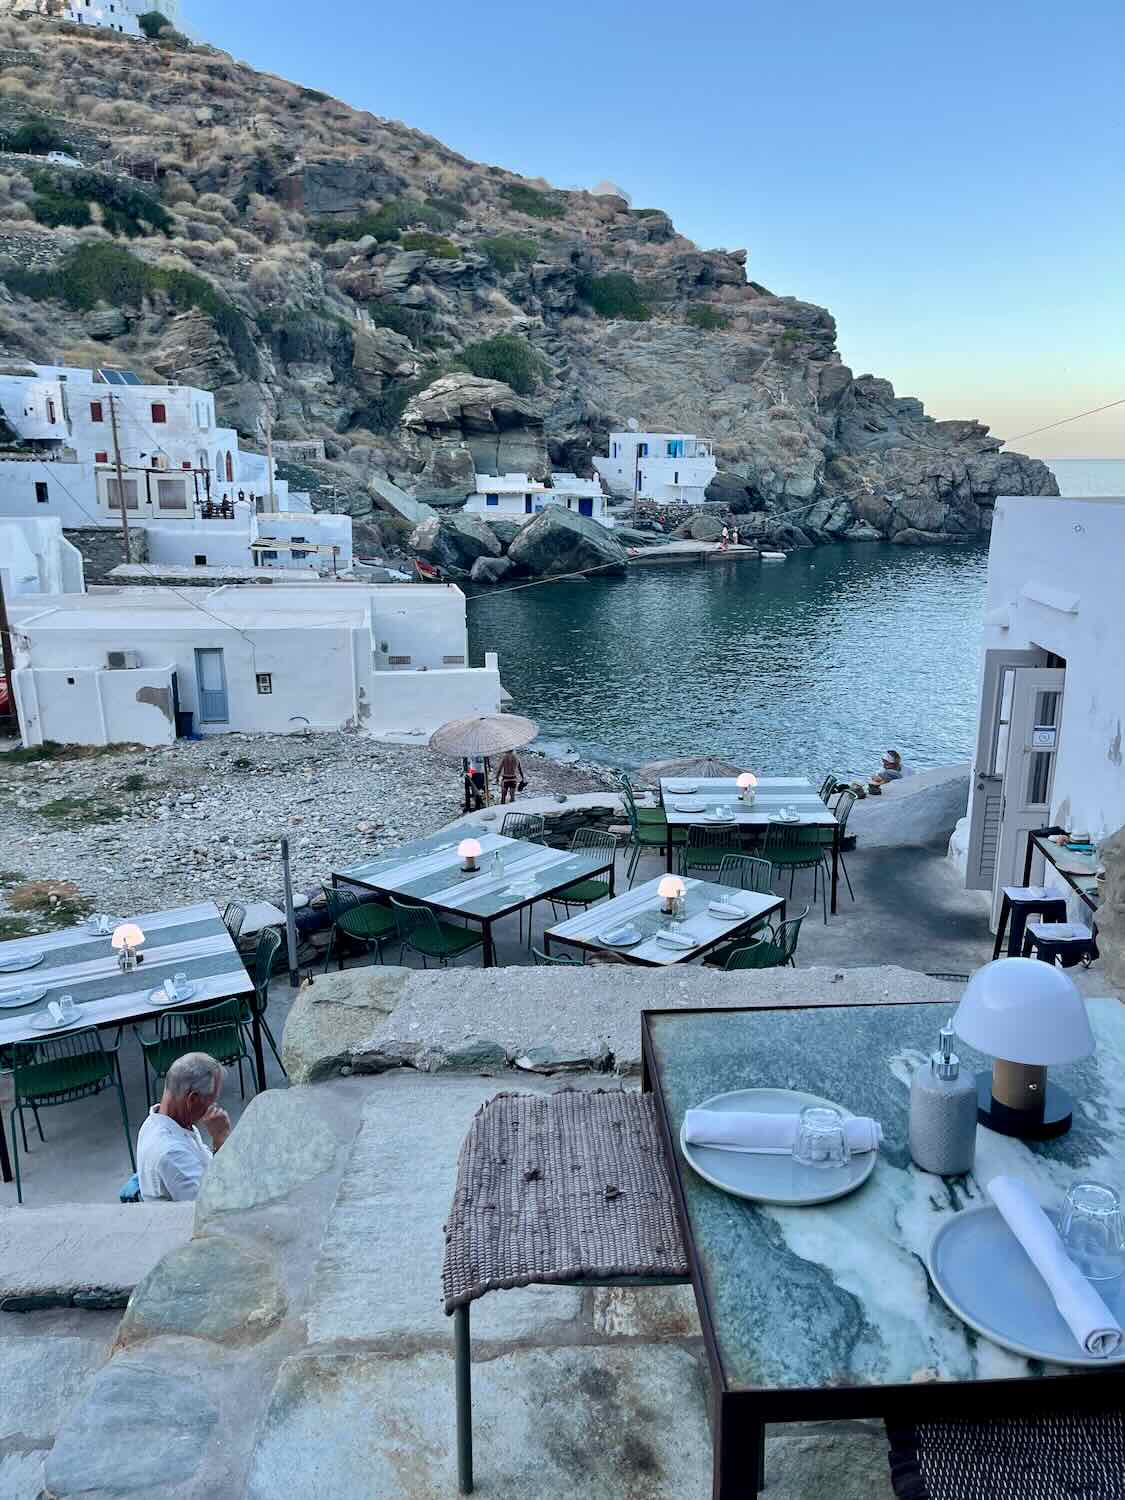 Tables set for a waterfront dining experience in Sifnos, nestled among white-washed buildings with the Mediterranean Sea as a backdrop